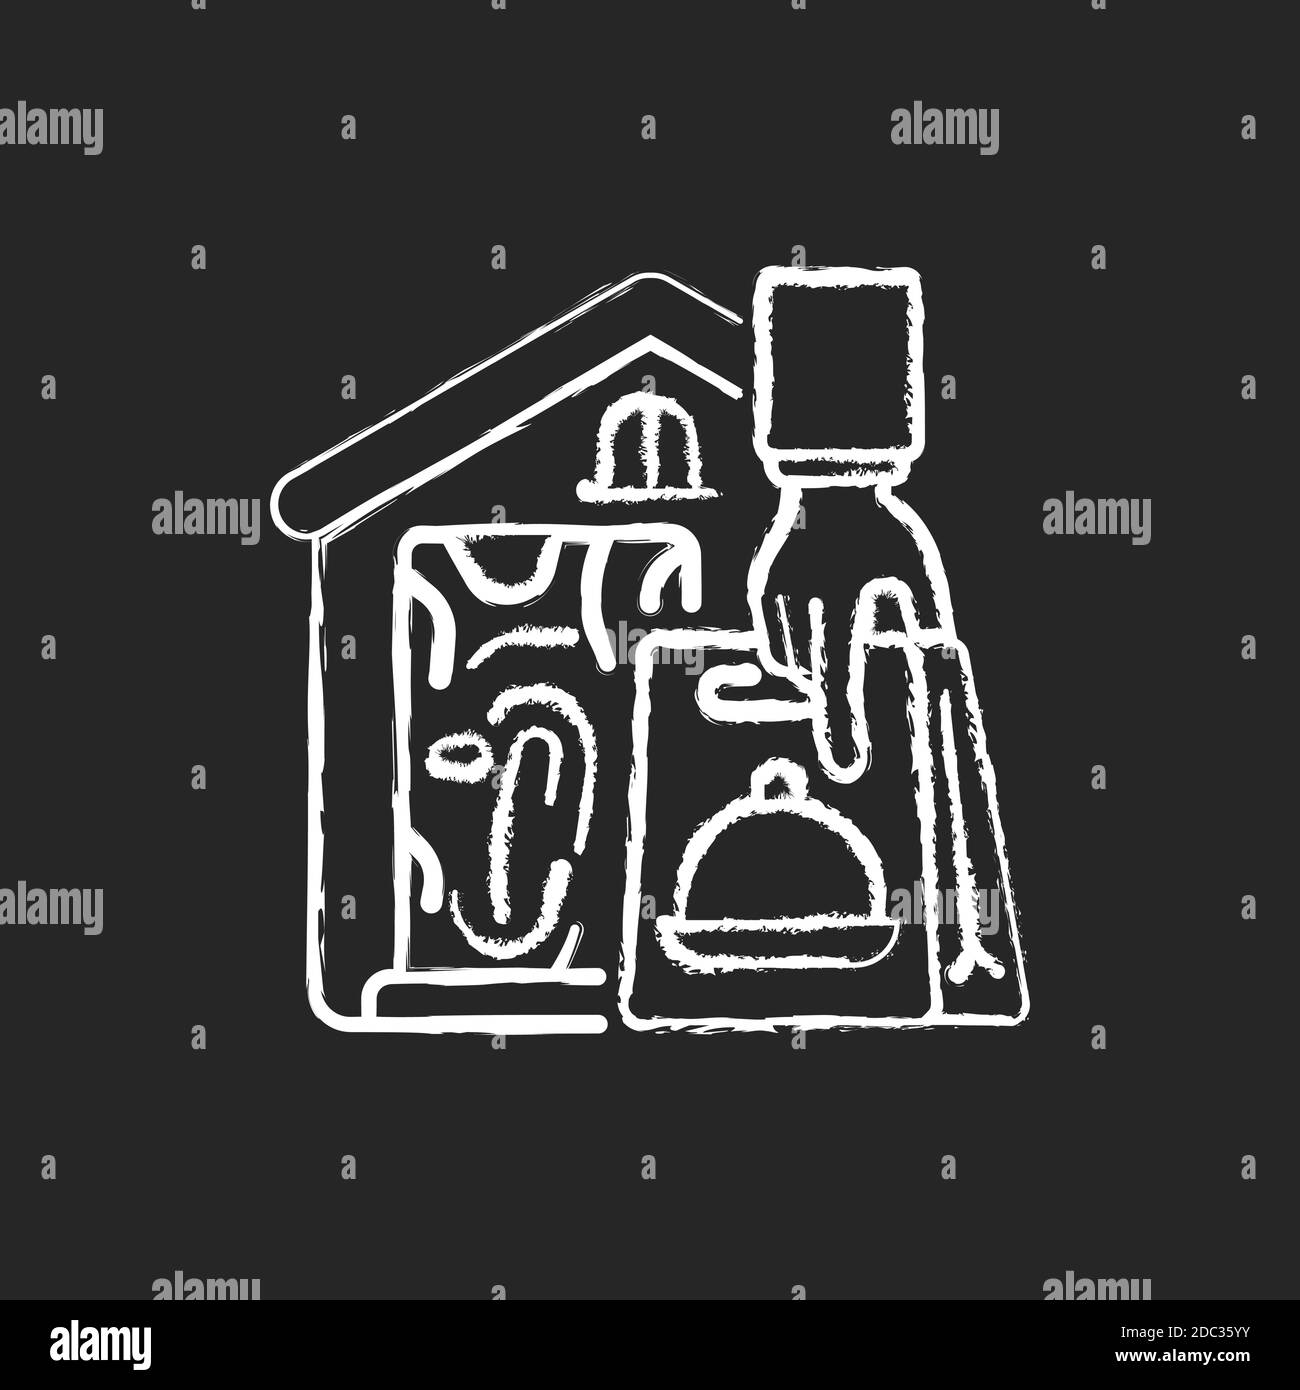 Personal shopping service chalk concept icon home Vector Image